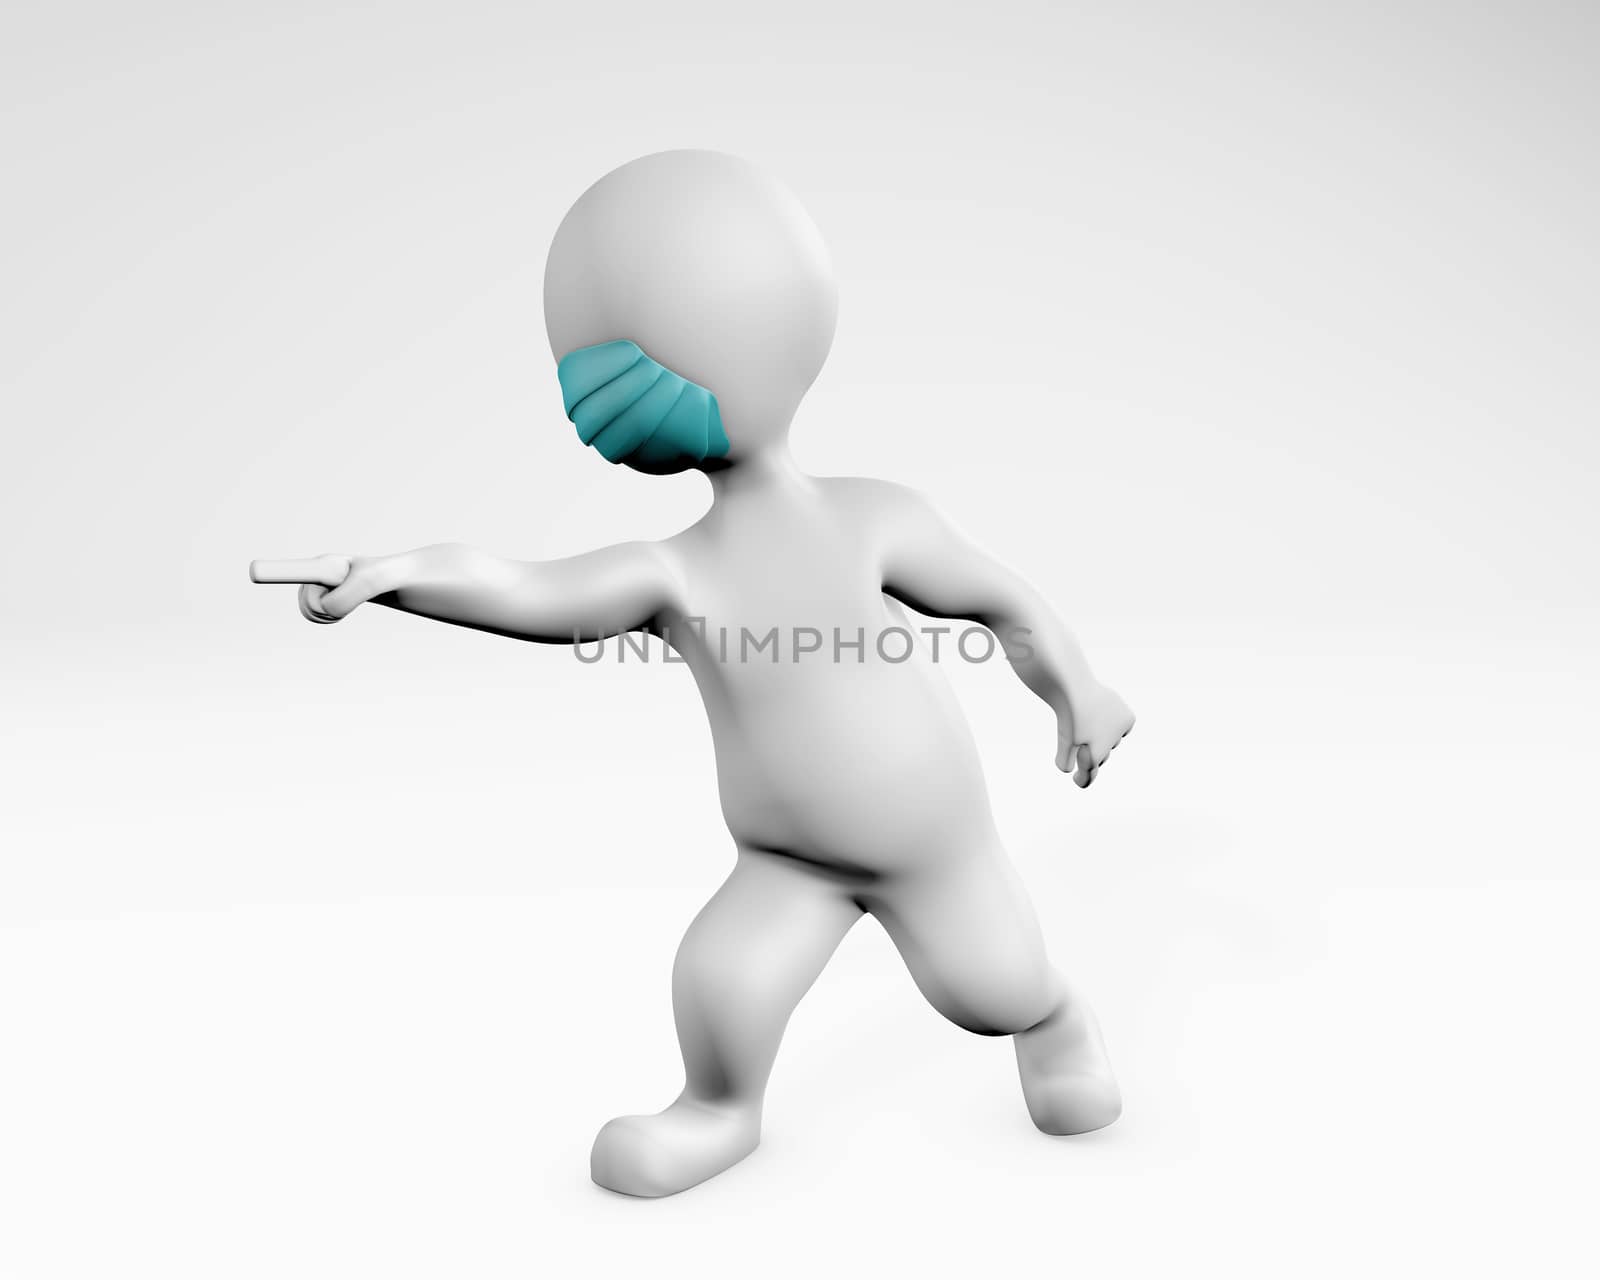 Man with mask Charge Gesture 3d rendering by F1b0nacci